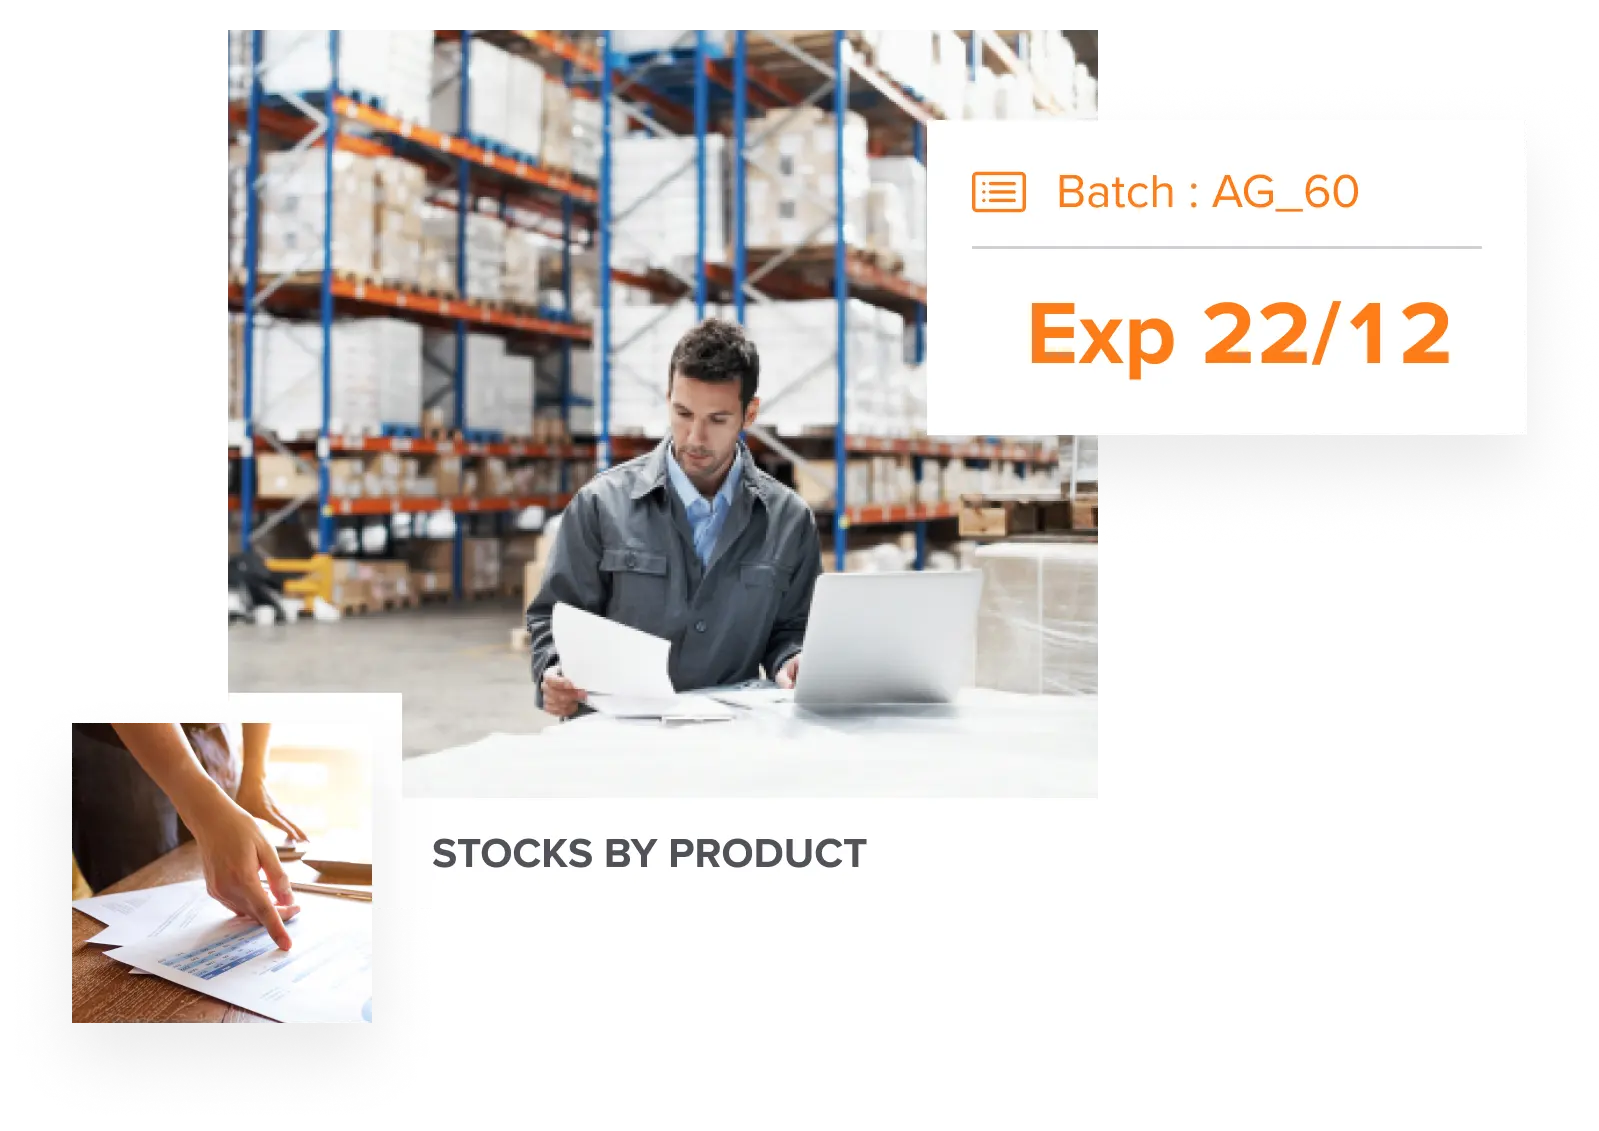 distributo-distributor-optimise-inventory-with-stock-reports